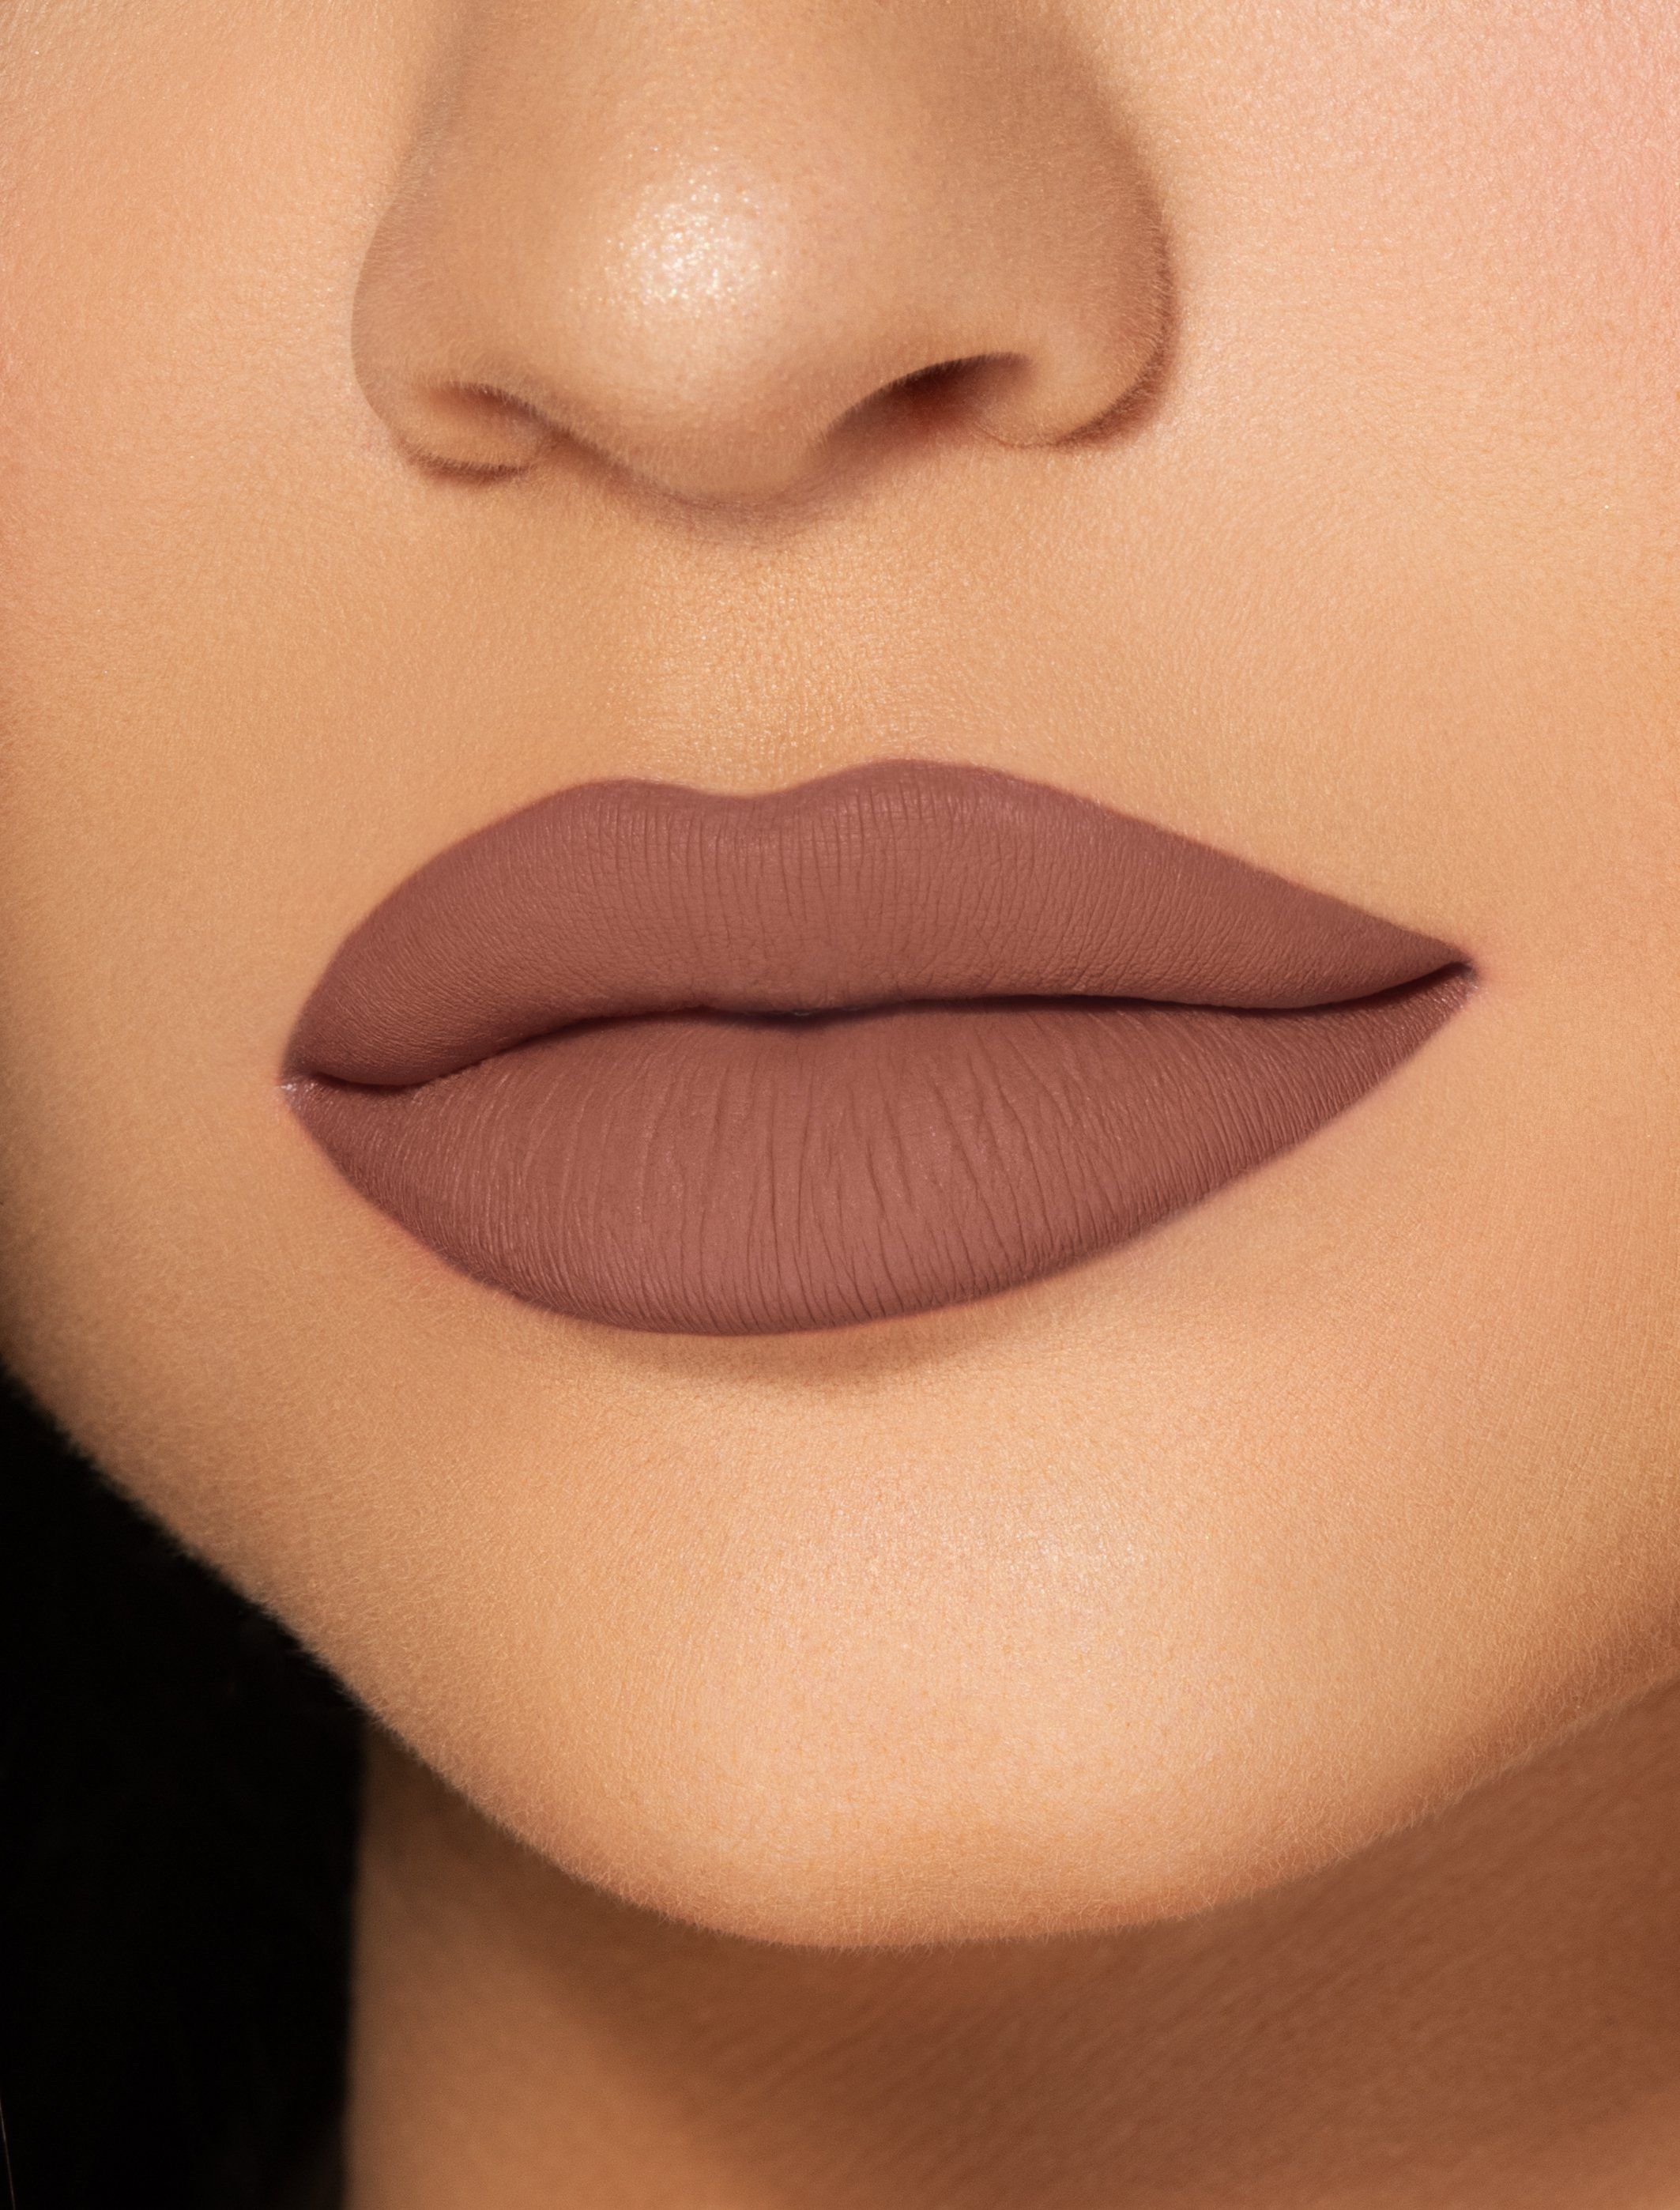 Kylie Jenner Lip Kits Are Currently 50% Off – Kylie Cosmetics Lip Kit Sale - Seventeen.com